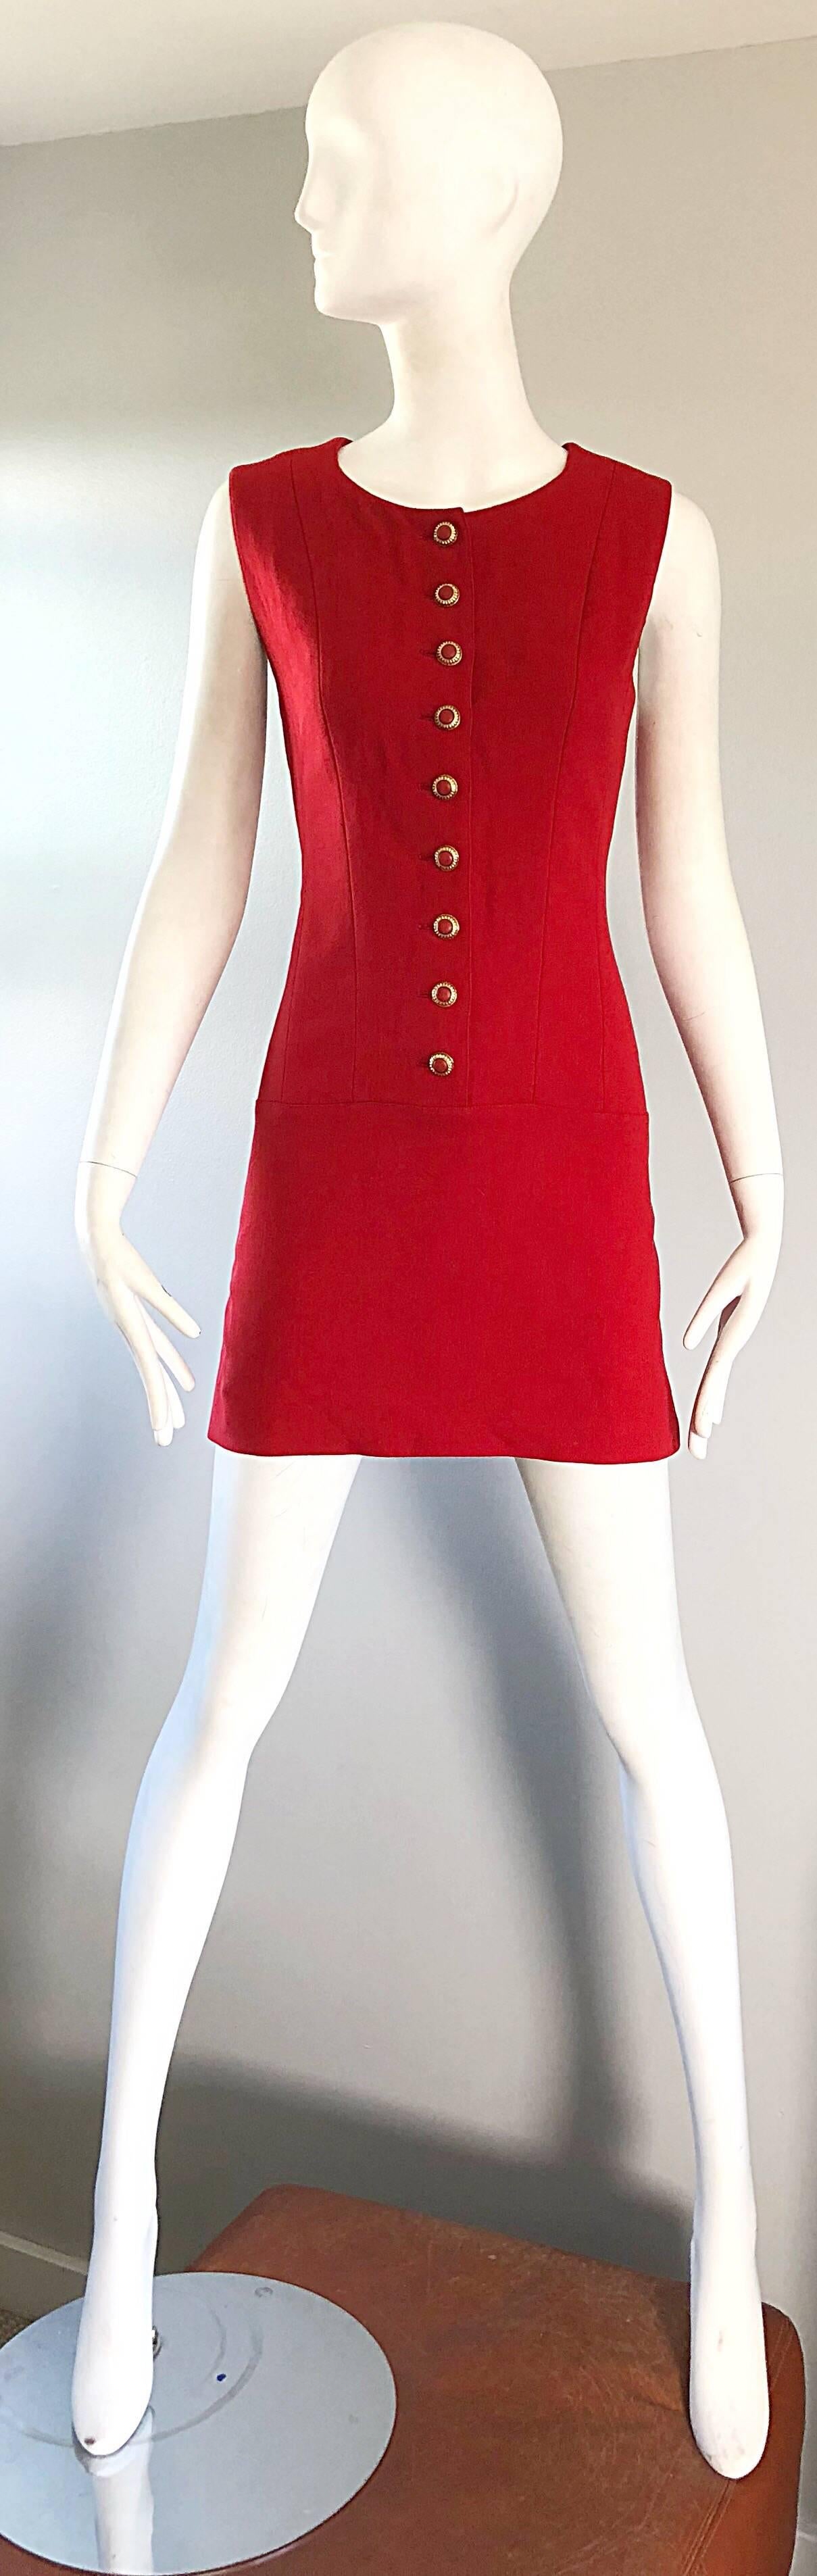 Karl Lagerfeld Chic Vintage  1990s Does 1960s Lipstick Red Wool Mini Shift Dress 3